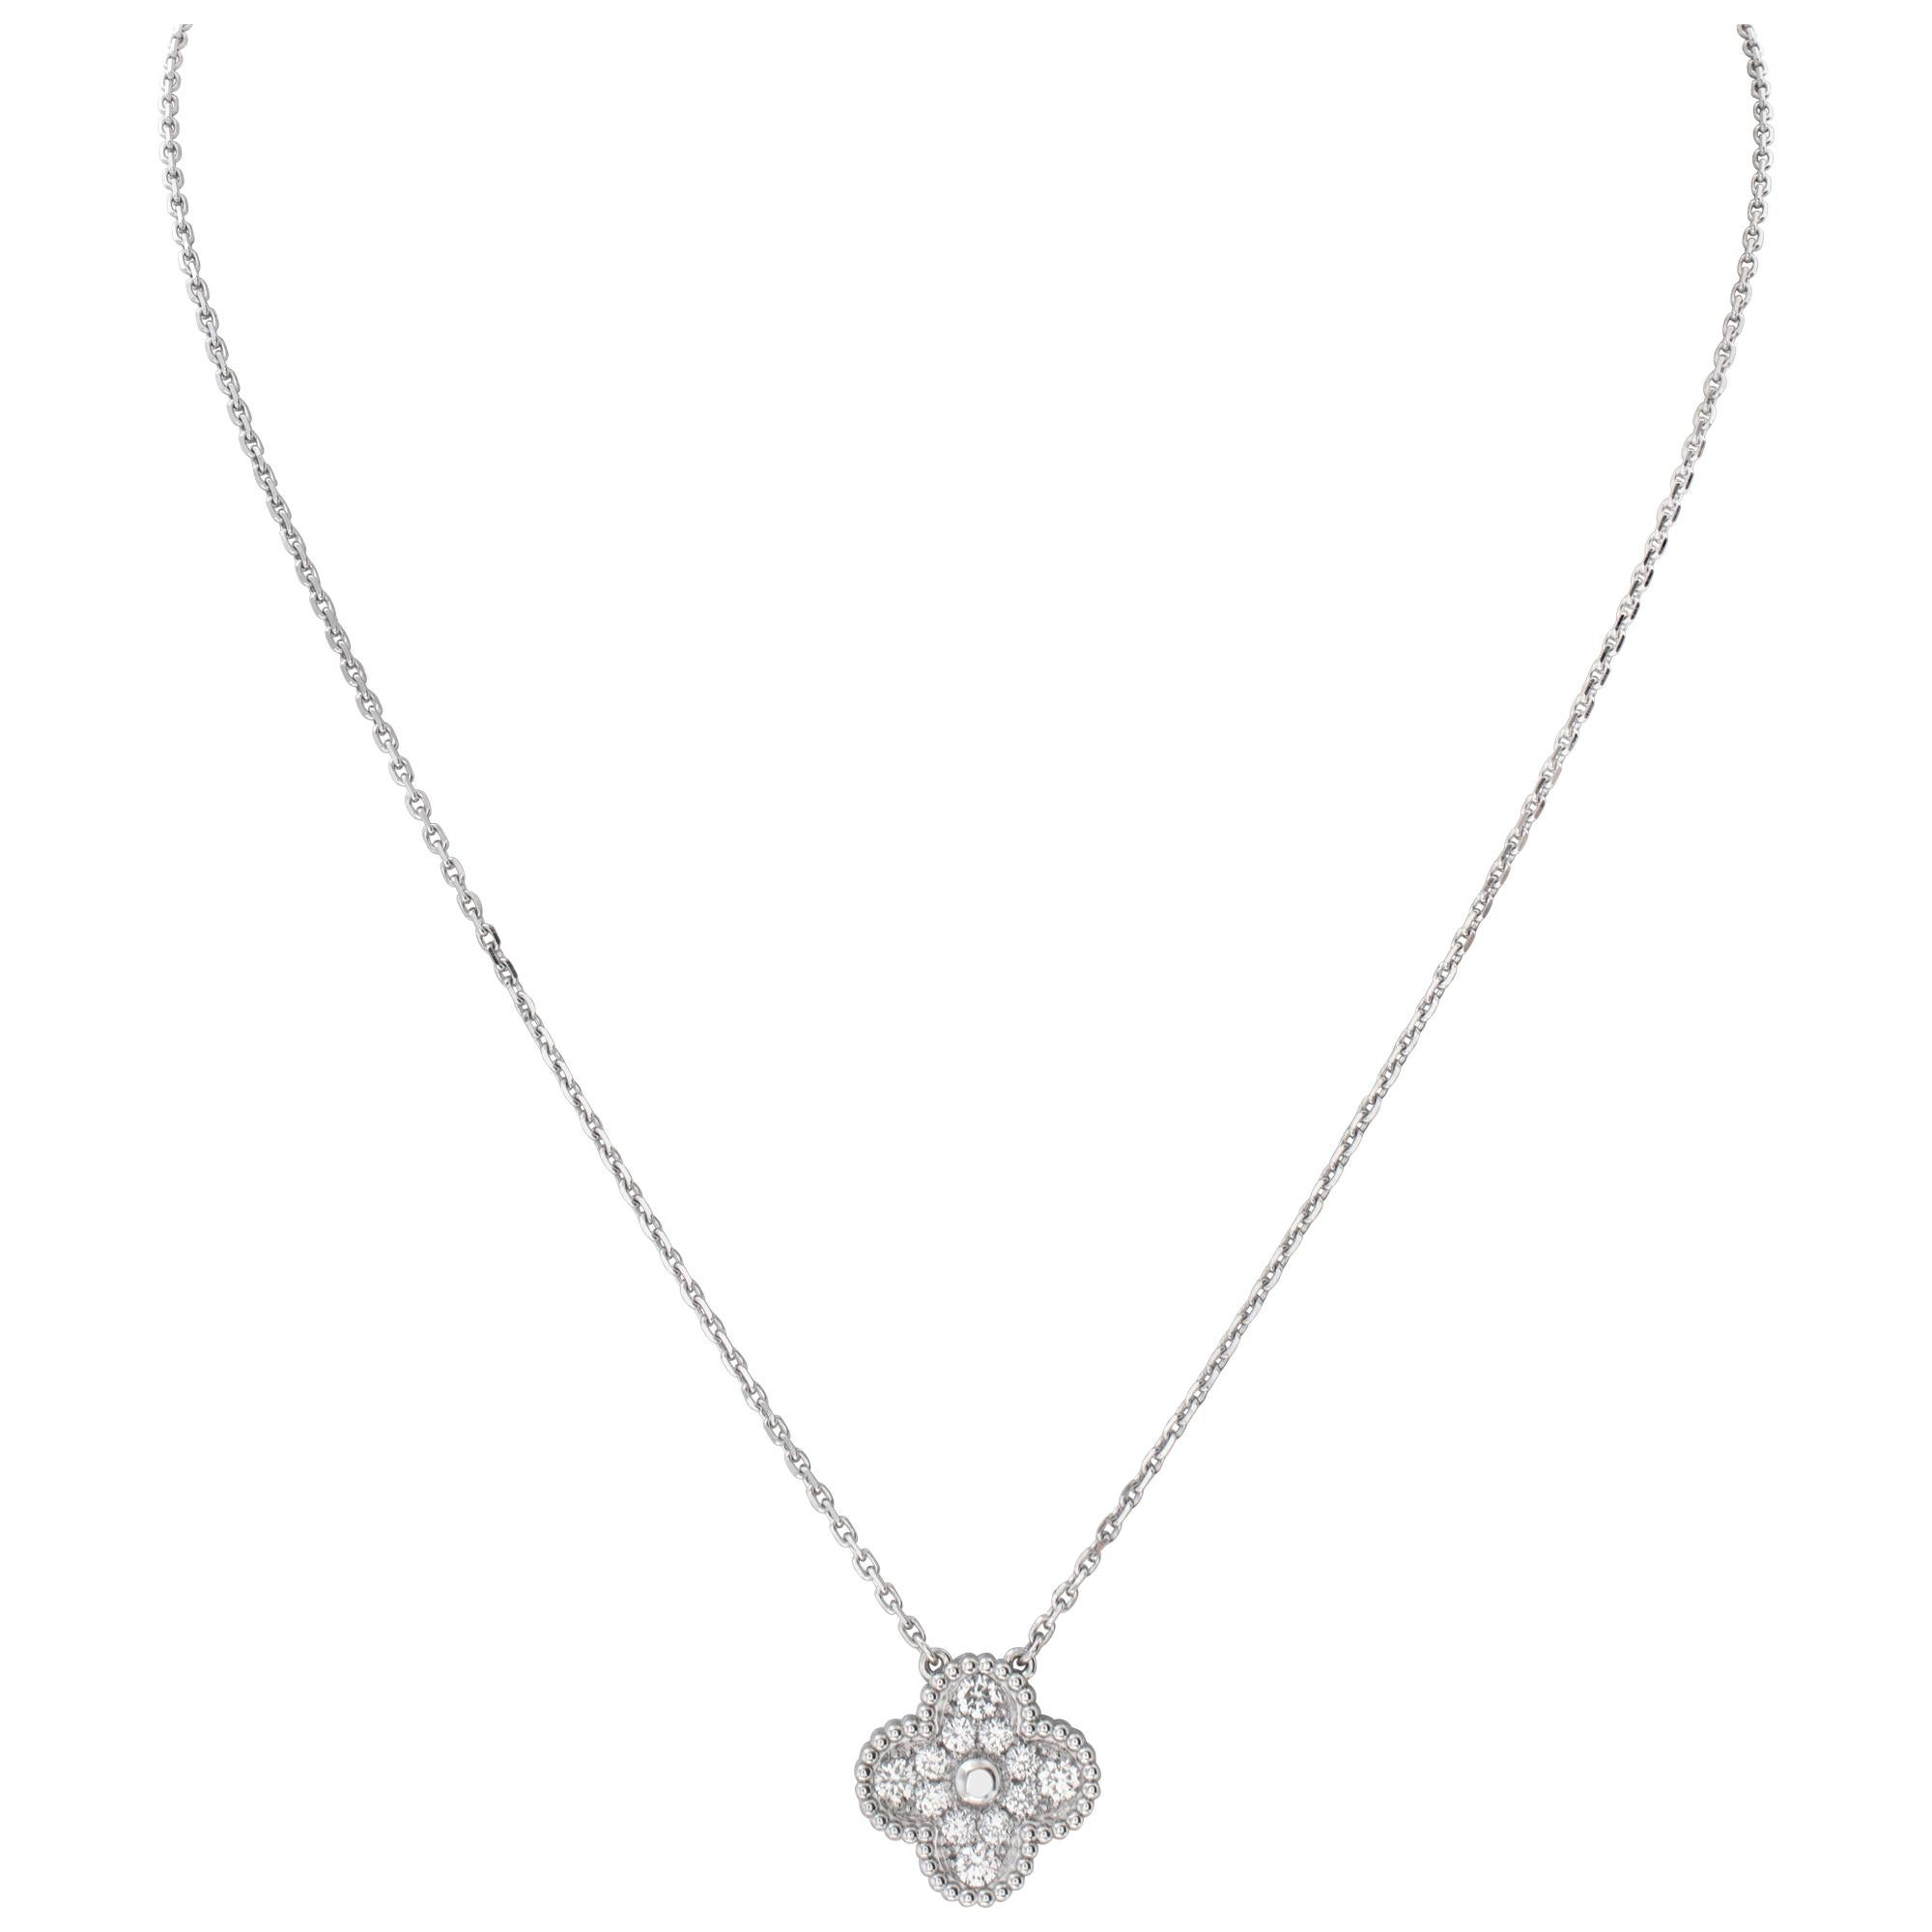 Van Cleef & Arpels Vintage Alhambra pendant necklace in 18k white gold with 0.48 ct in D-F Color, VVS Clarity diamonds. Length 16.5'', pendant 15mm x 11mm. Box and papers 2021.
